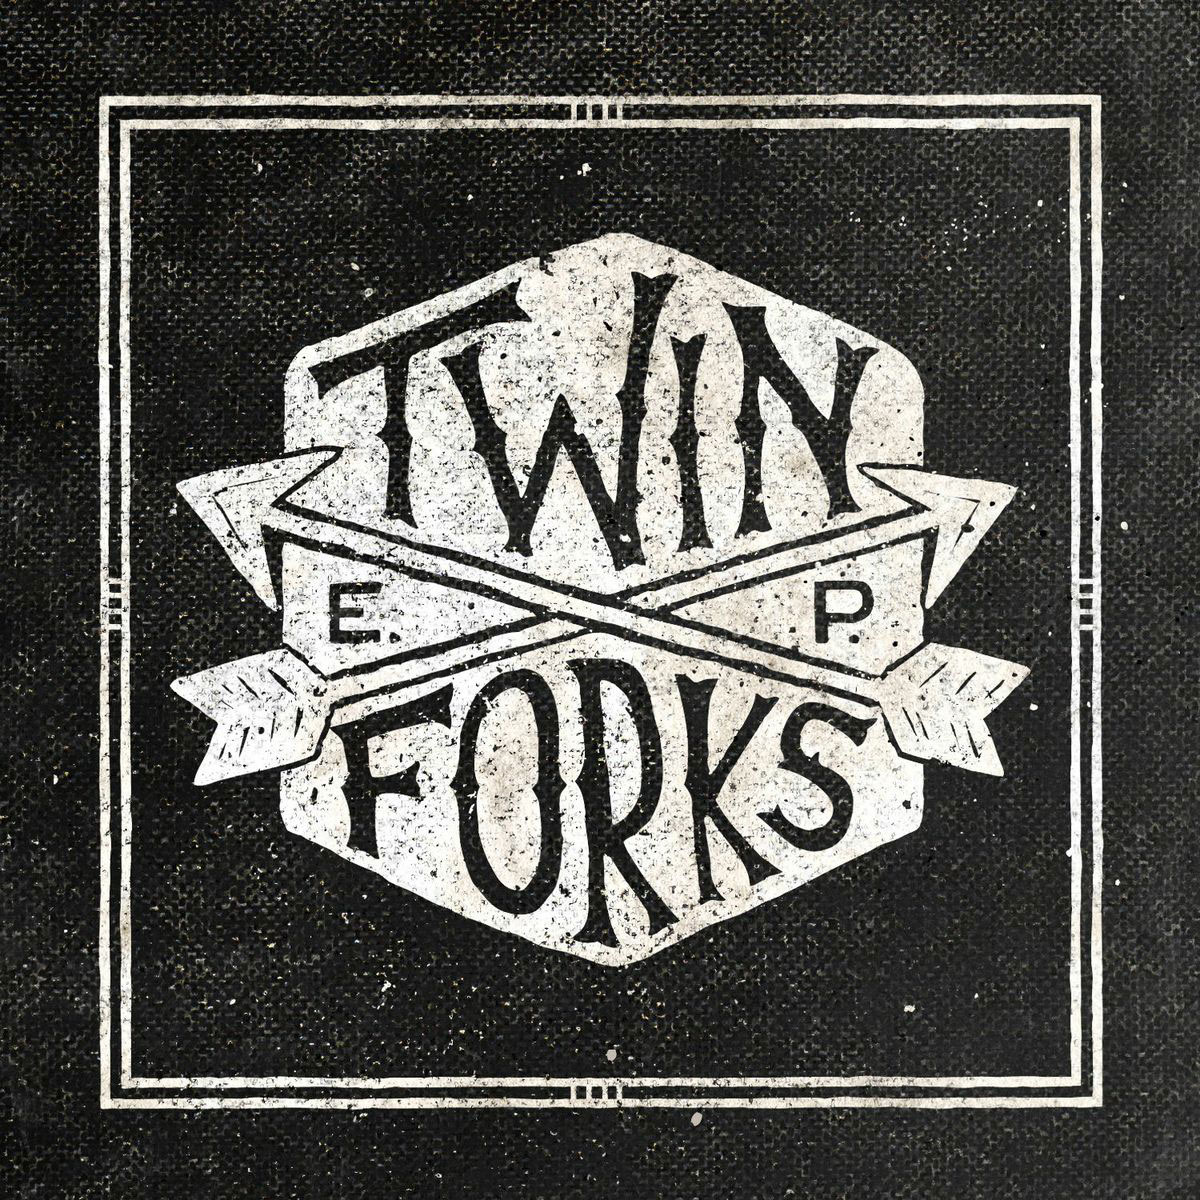 Twin Forks